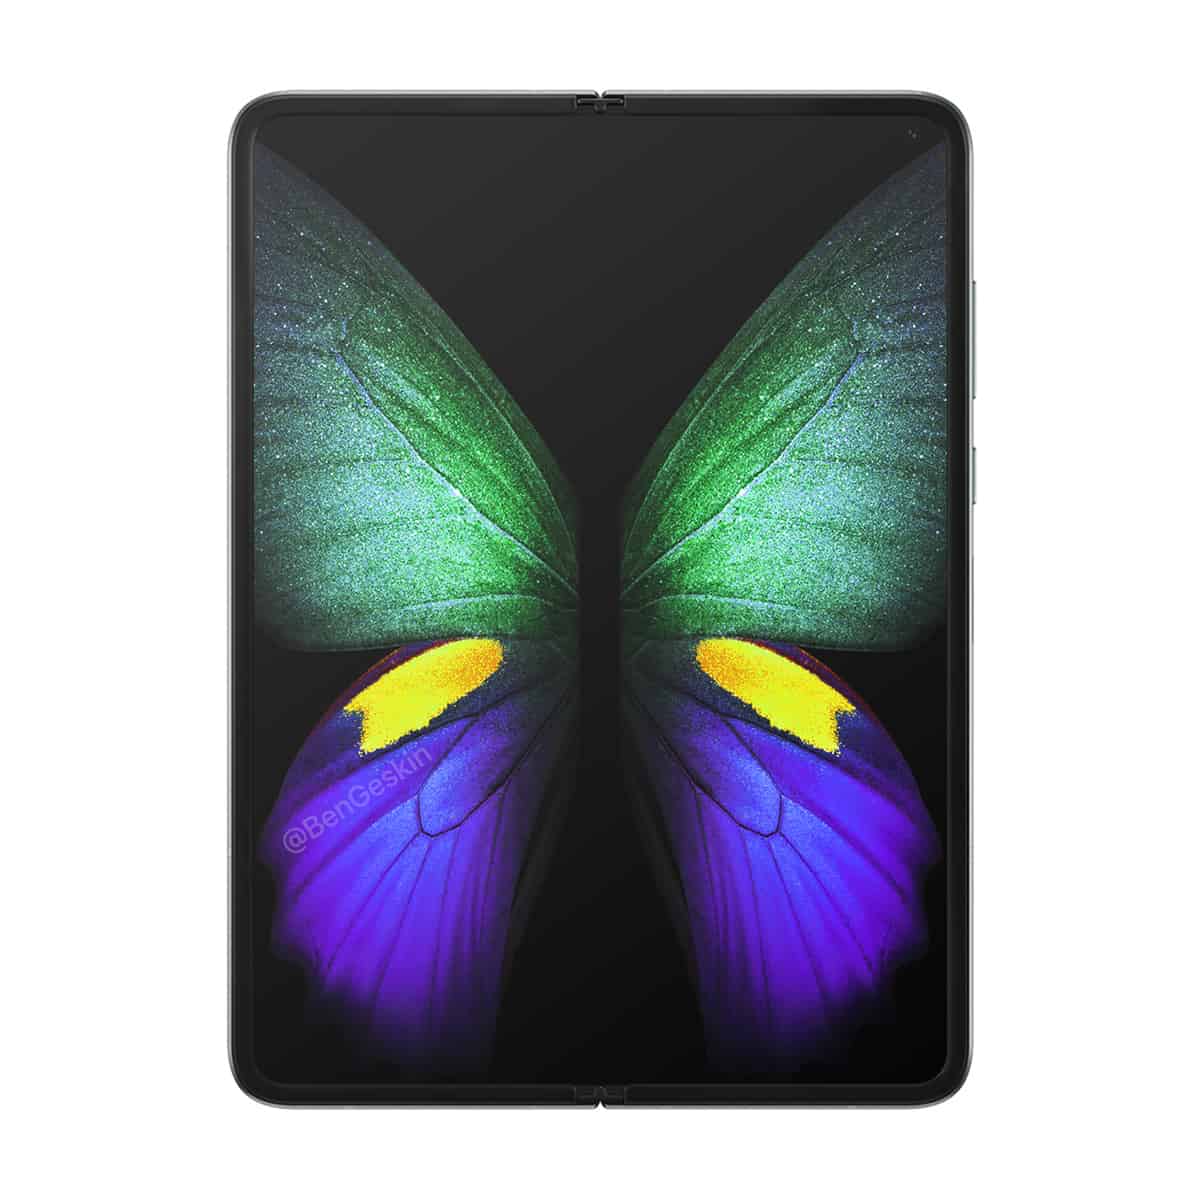 Galaxy Fold 2 may come with a new form of S Pen